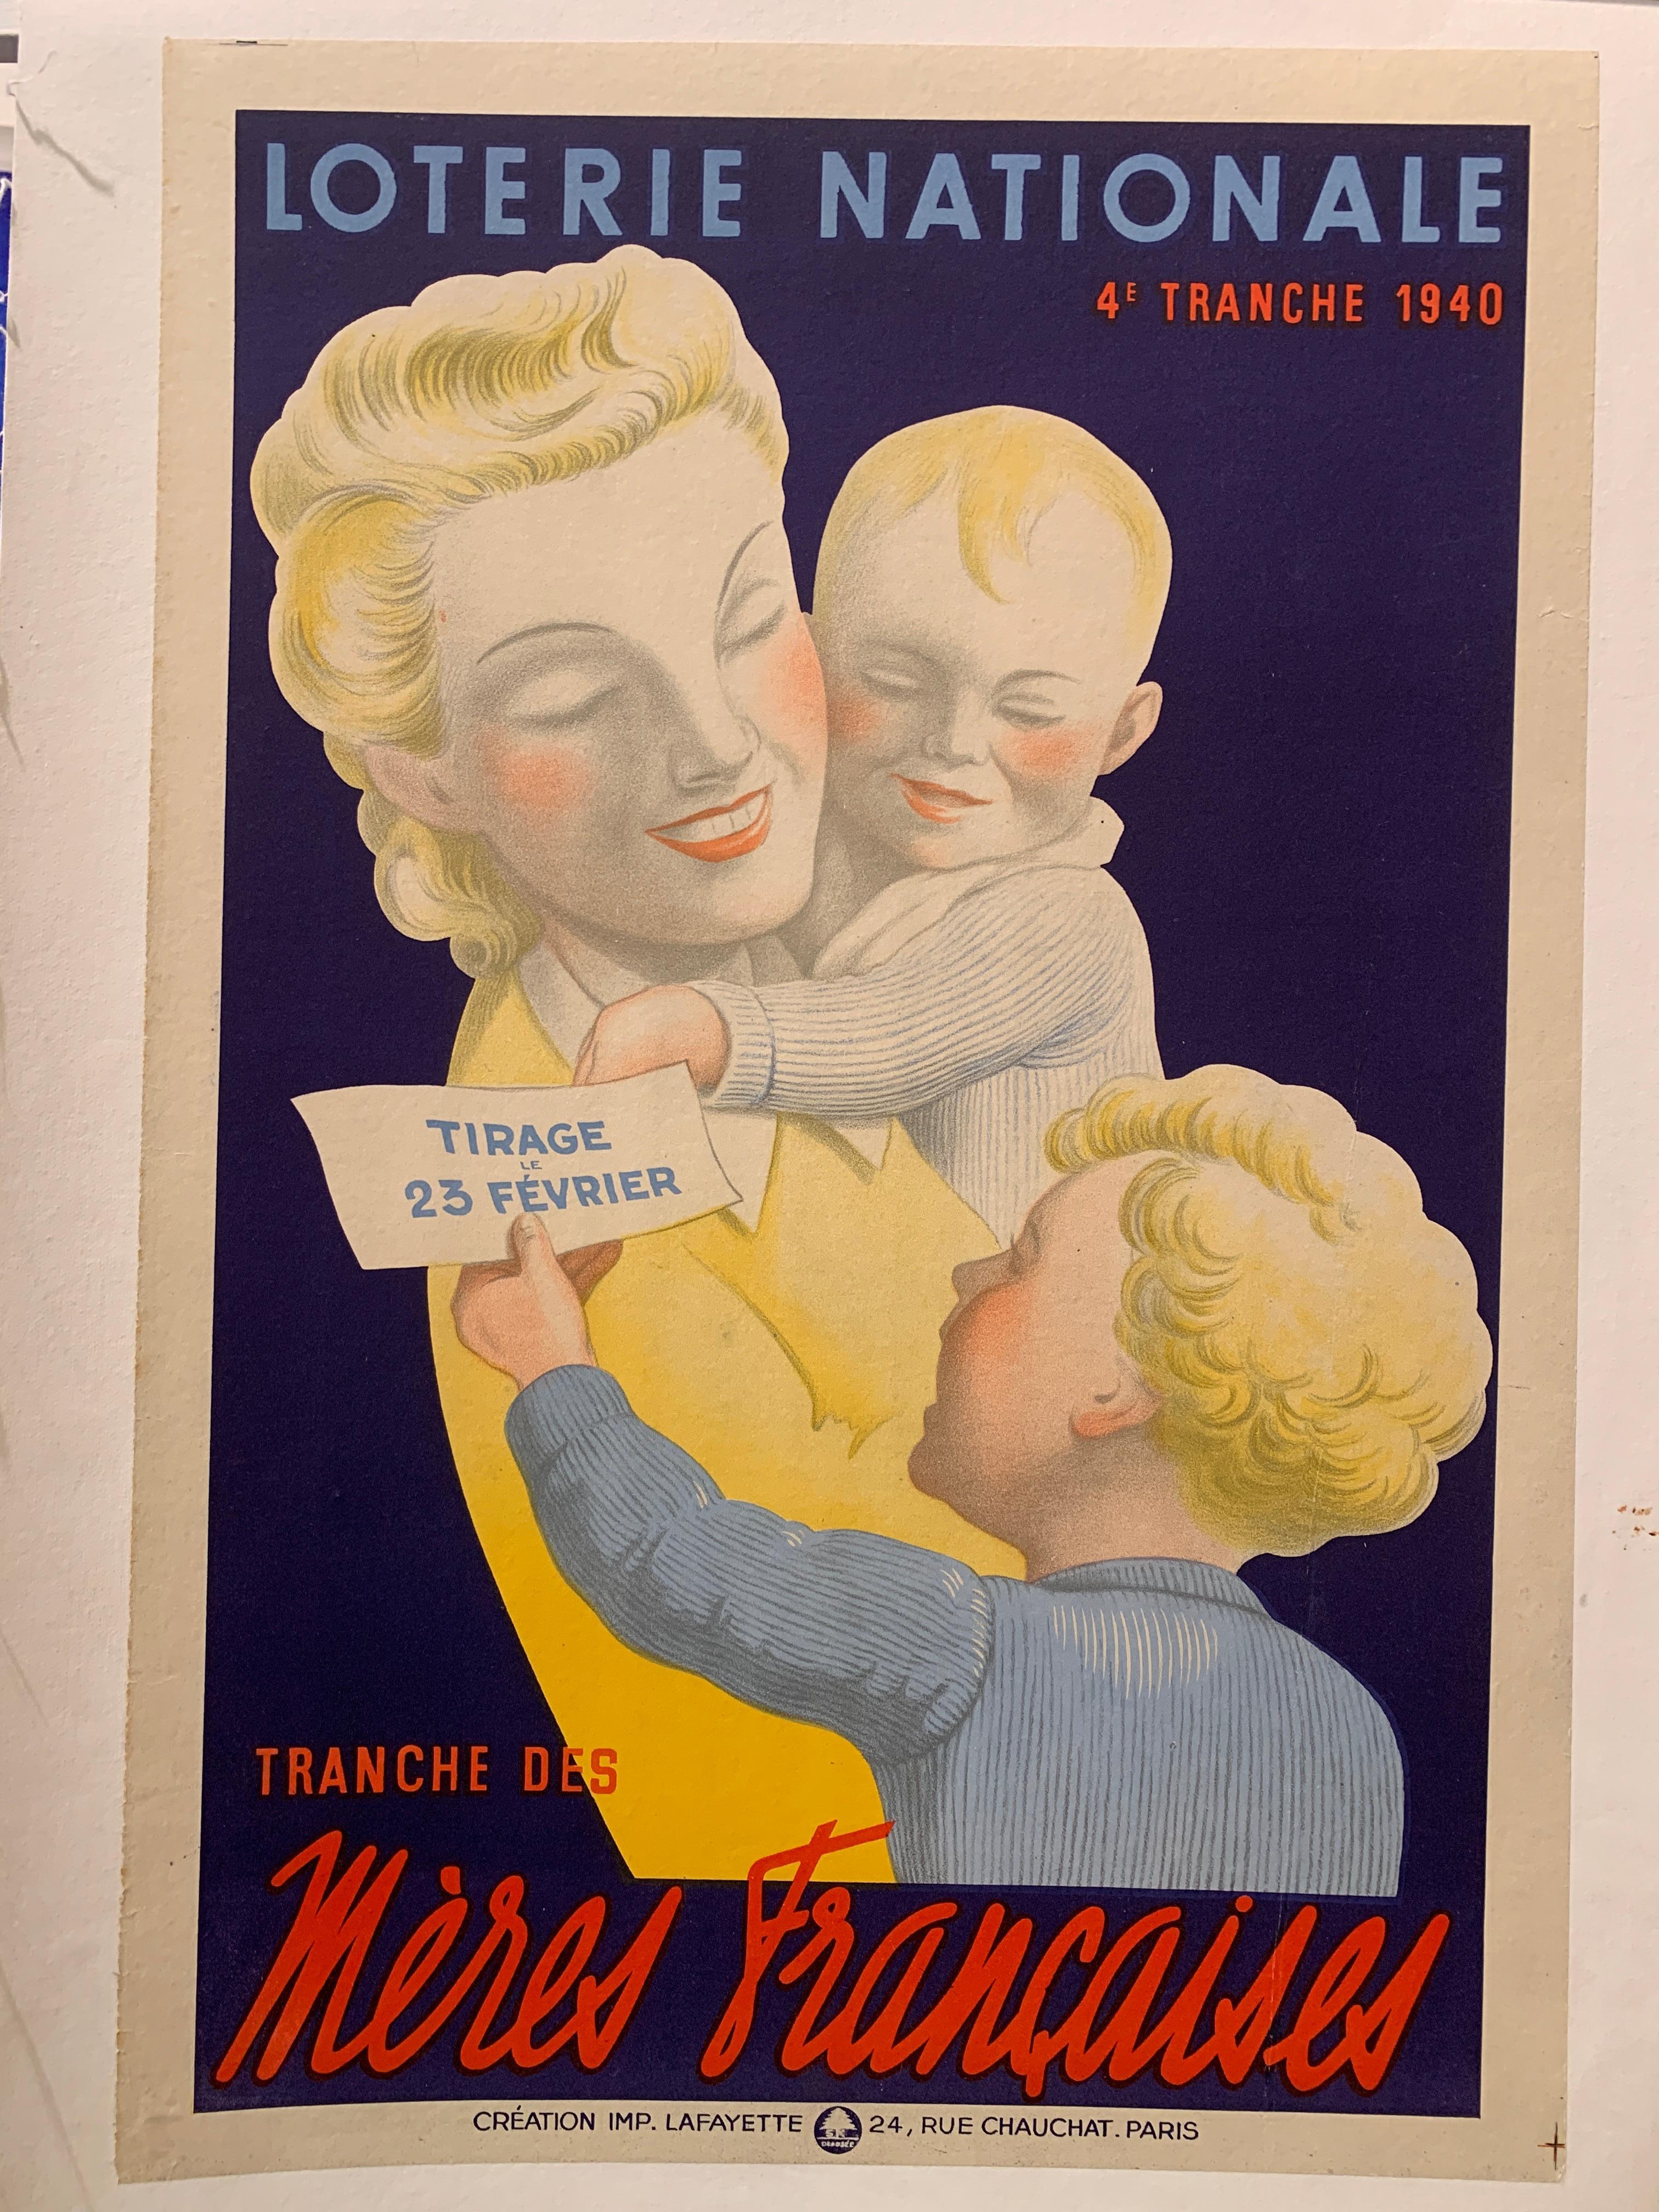 Original Vintage Poster Deco Poster, 1940 'Loterie Nationale' Meres Francaises' In Good Condition For Sale In Melbourne, Victoria